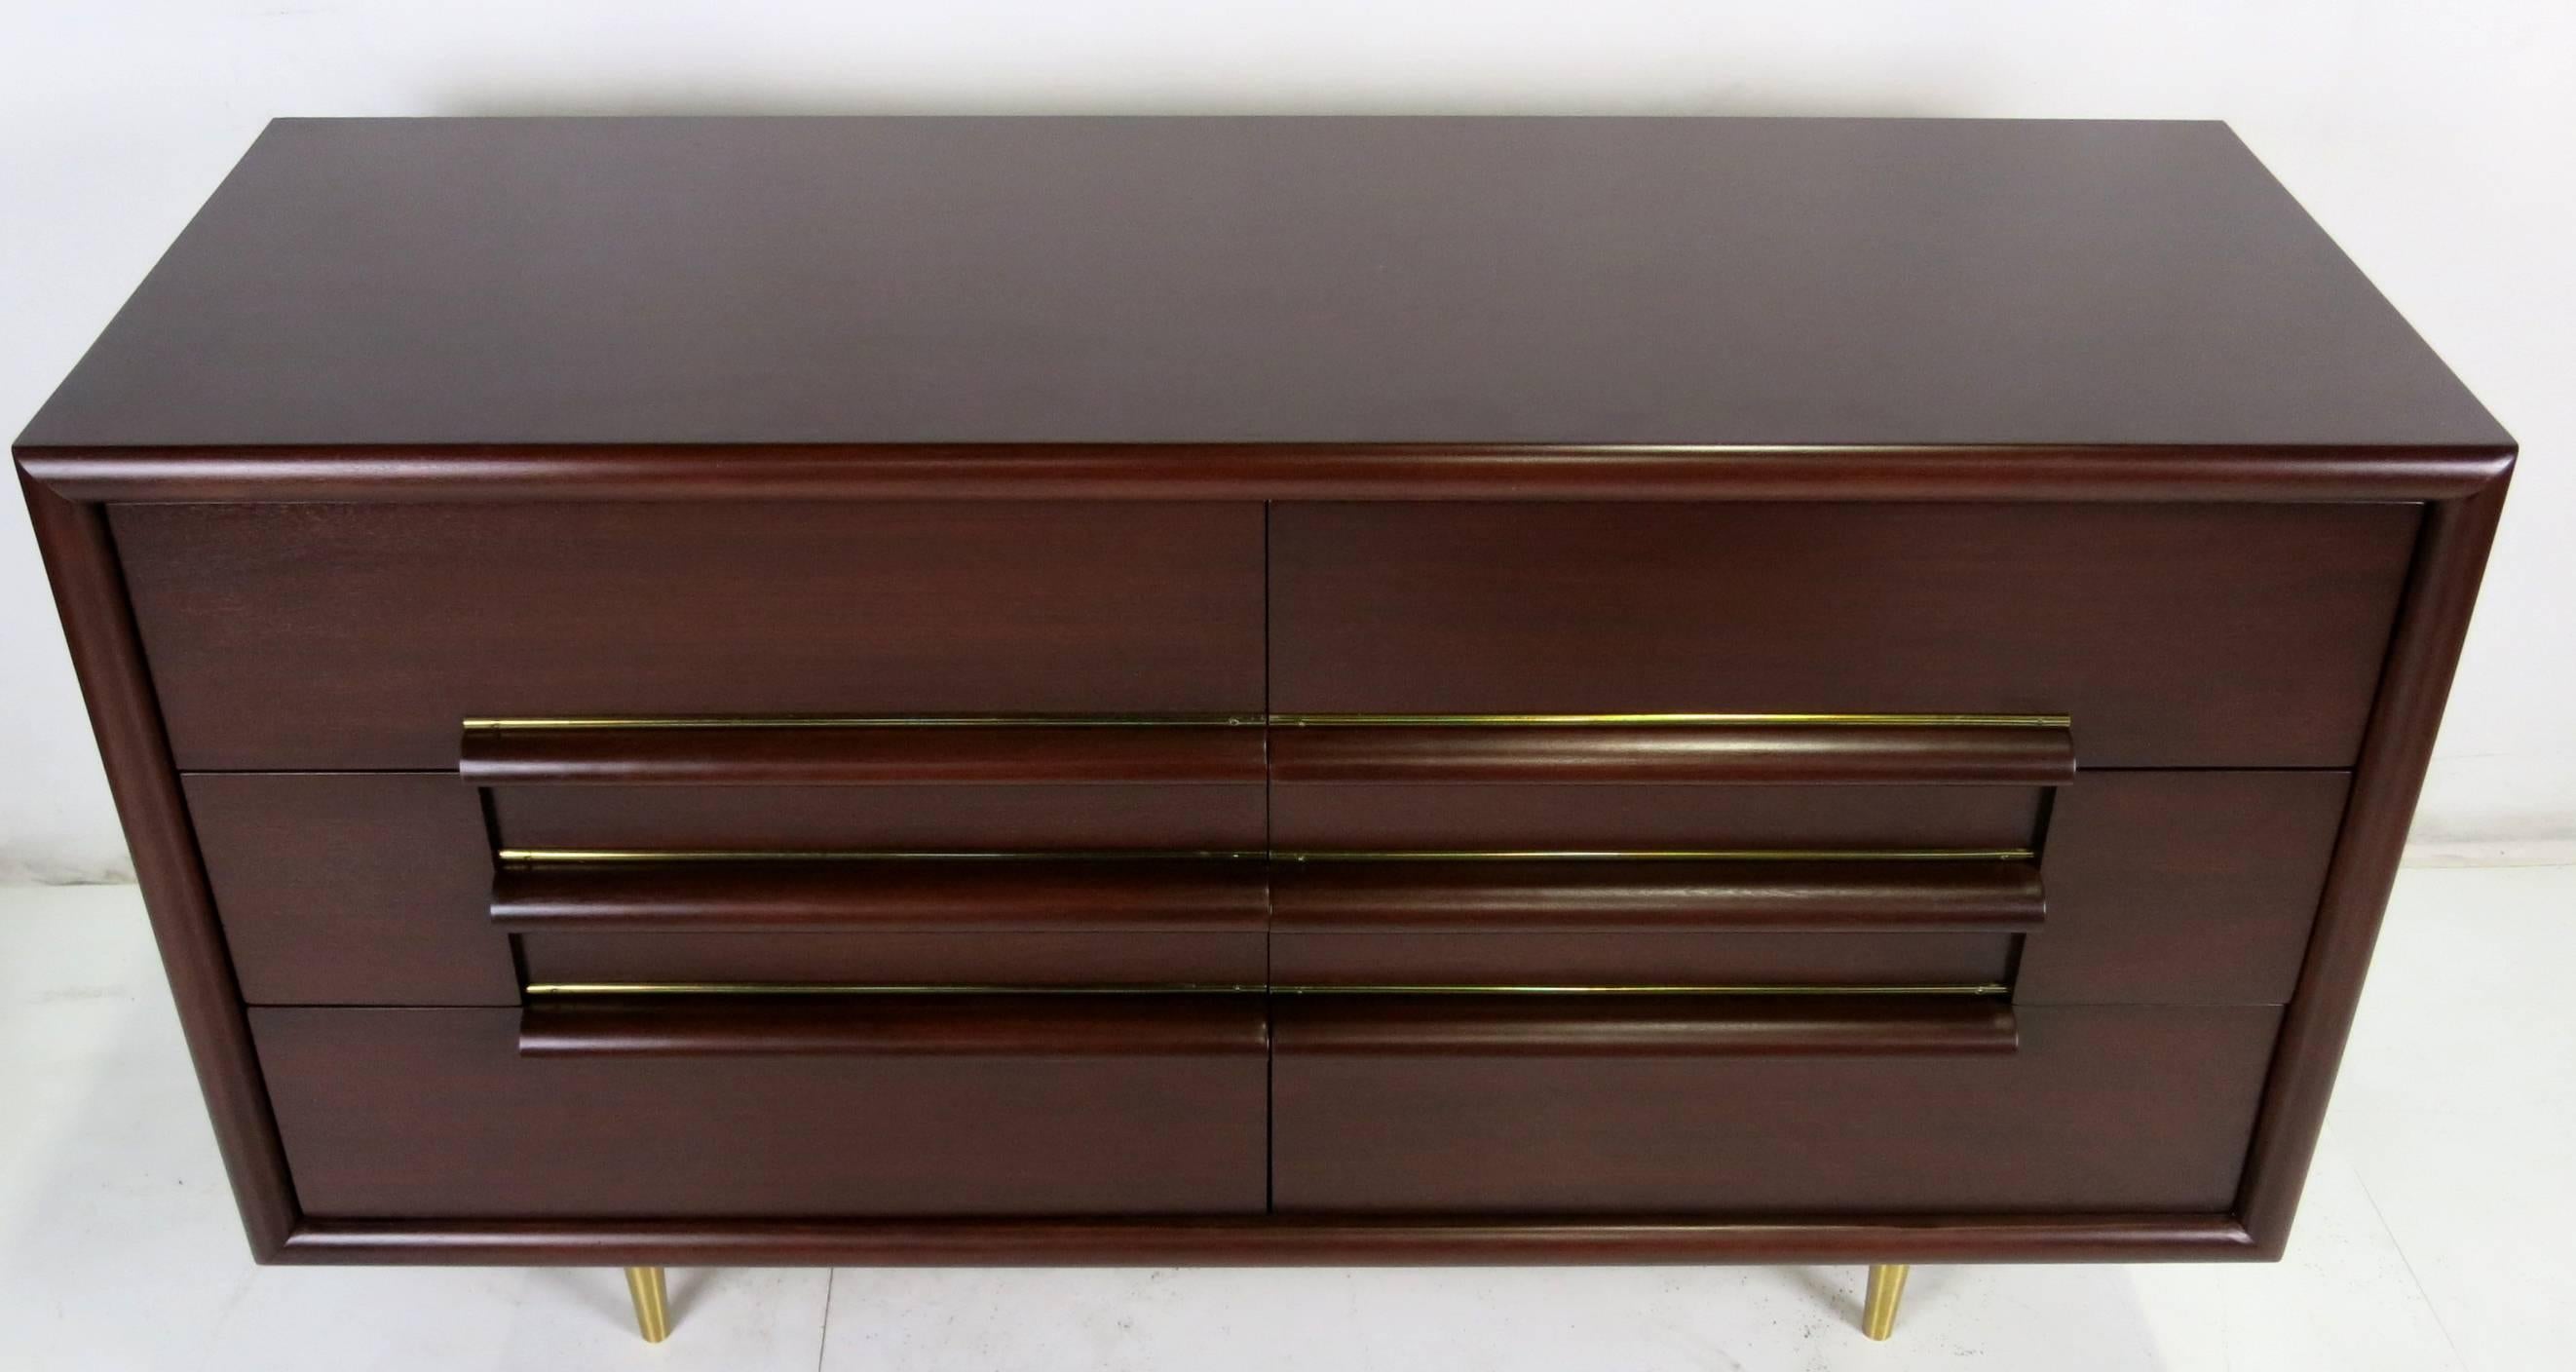 Handsome Mid-Century Modern dresser with brass-trimmed thick finger pulls and tapered brass legs meticulously restored and refinished in dark brown lacquer by Furniture Guild of California, circa 1950s. The brass legs have also been refinished and